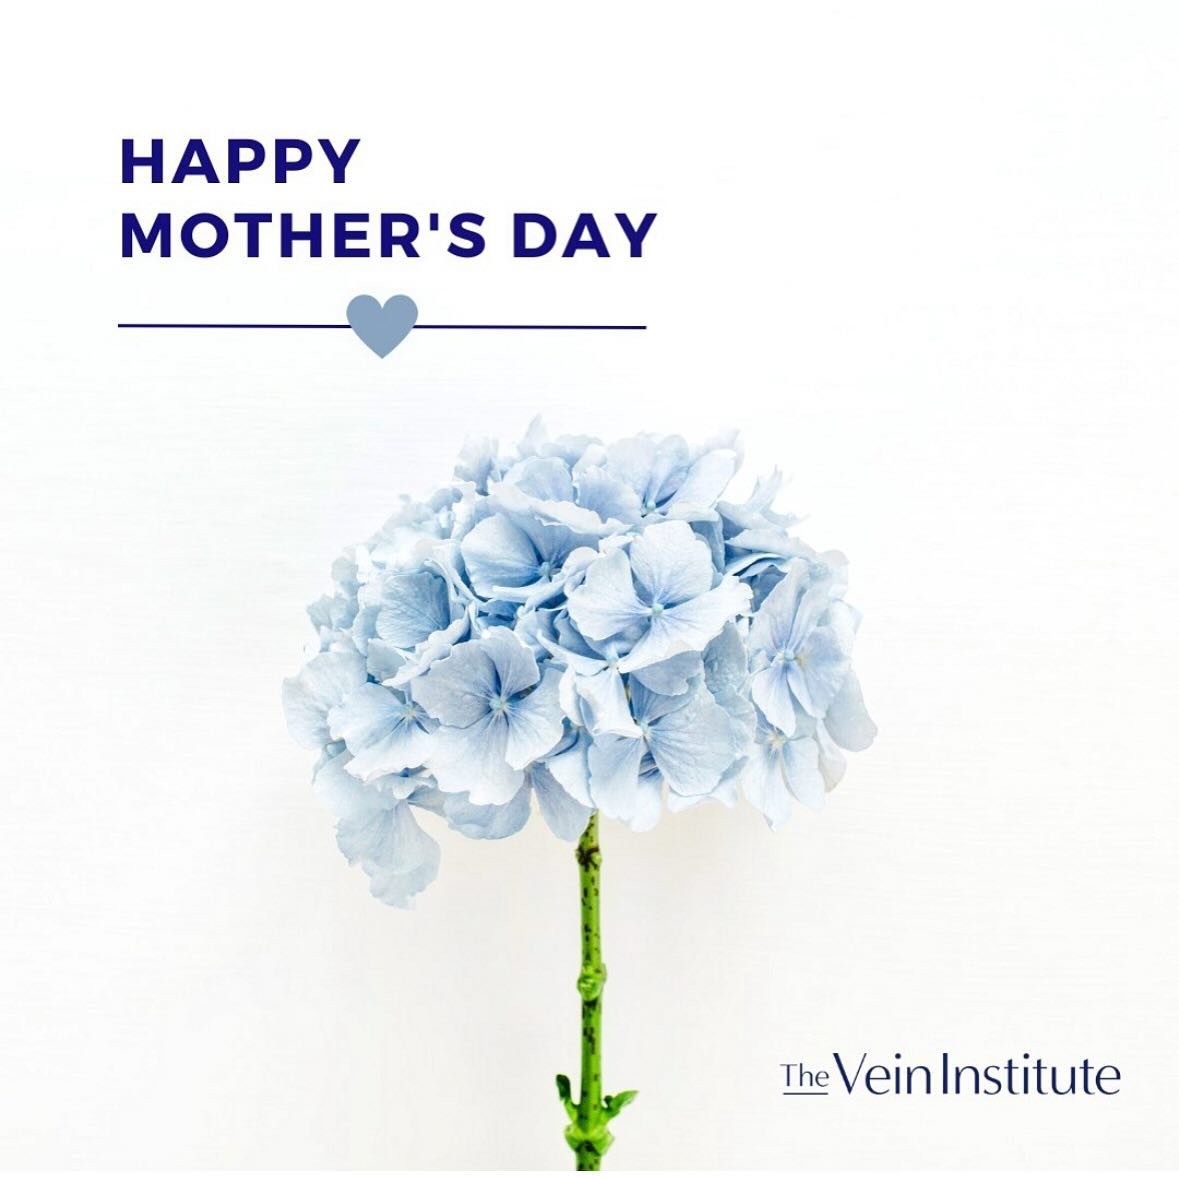 Happy Mother&rsquo;s Day from the Vein Institute! We hope you have a wonderful day filled with love from your family and friends🩵💐